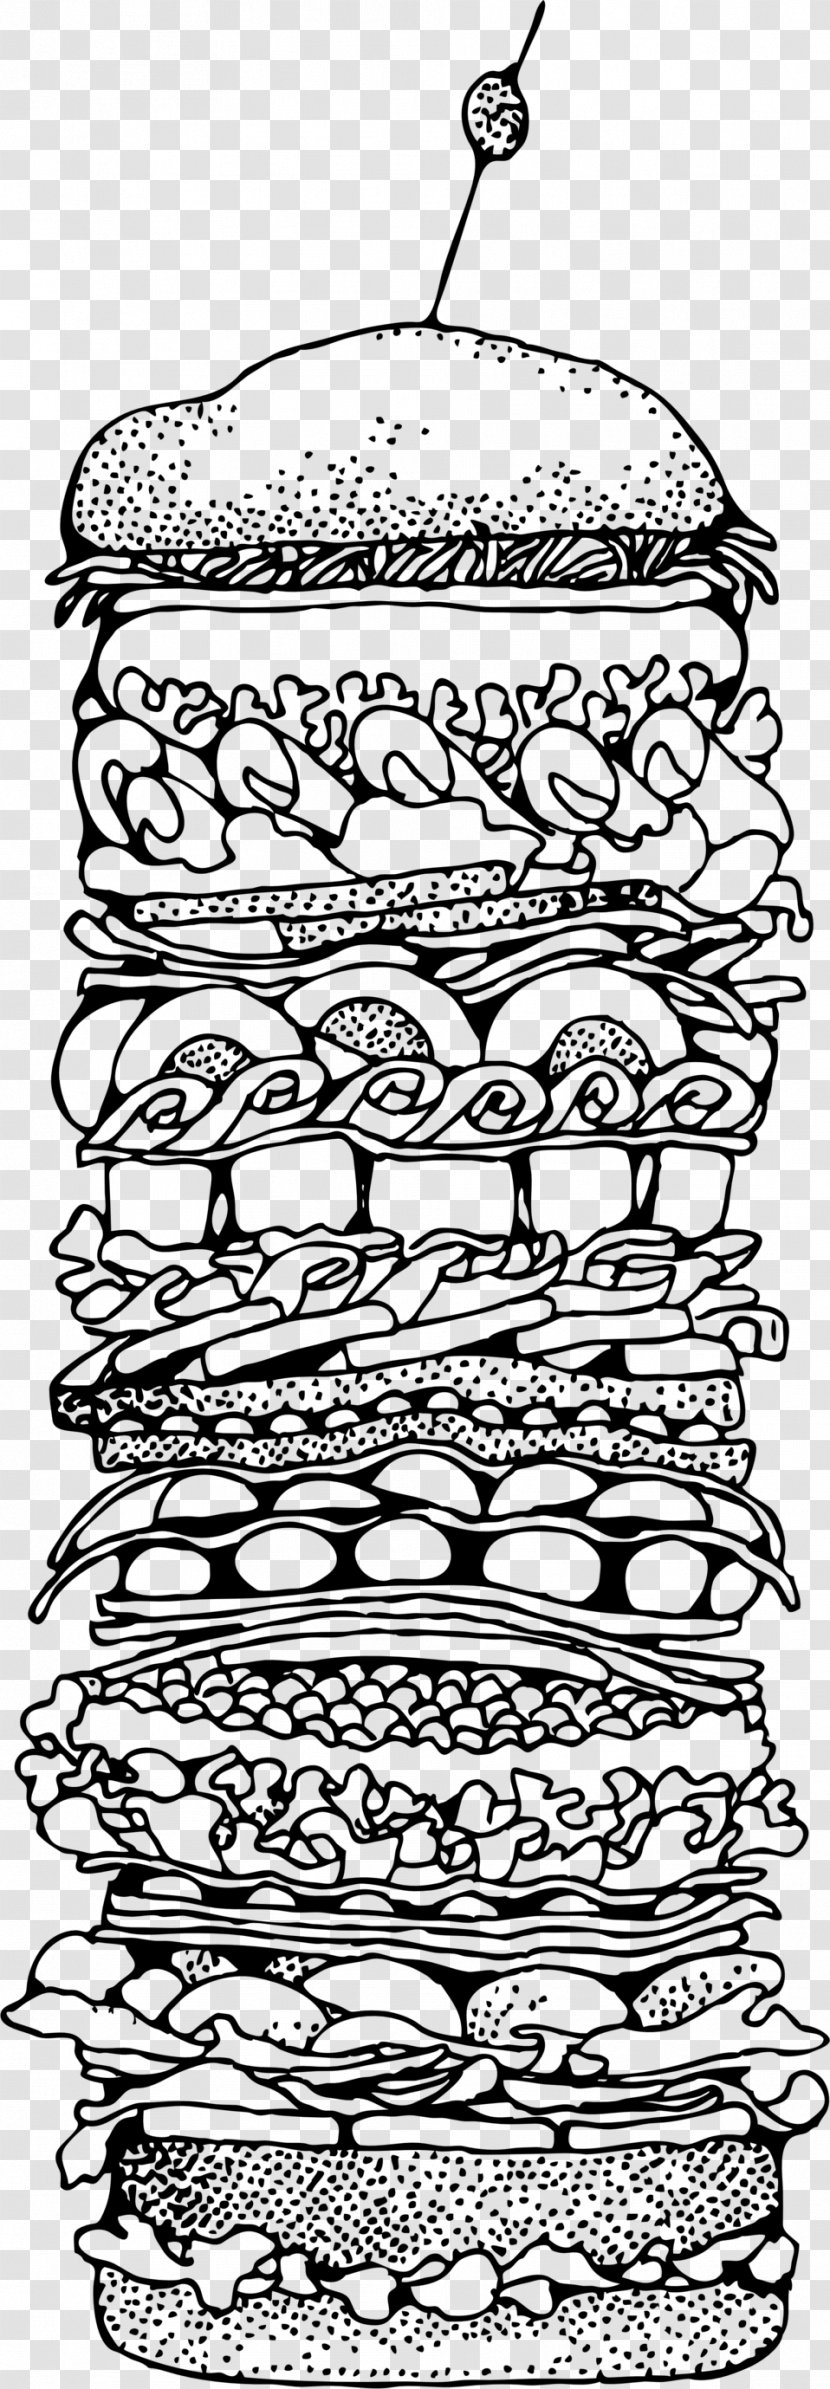 Hamburger Peanut Butter And Jelly Sandwich Submarine Clip Art - Tree - Clipart Transparent PNG